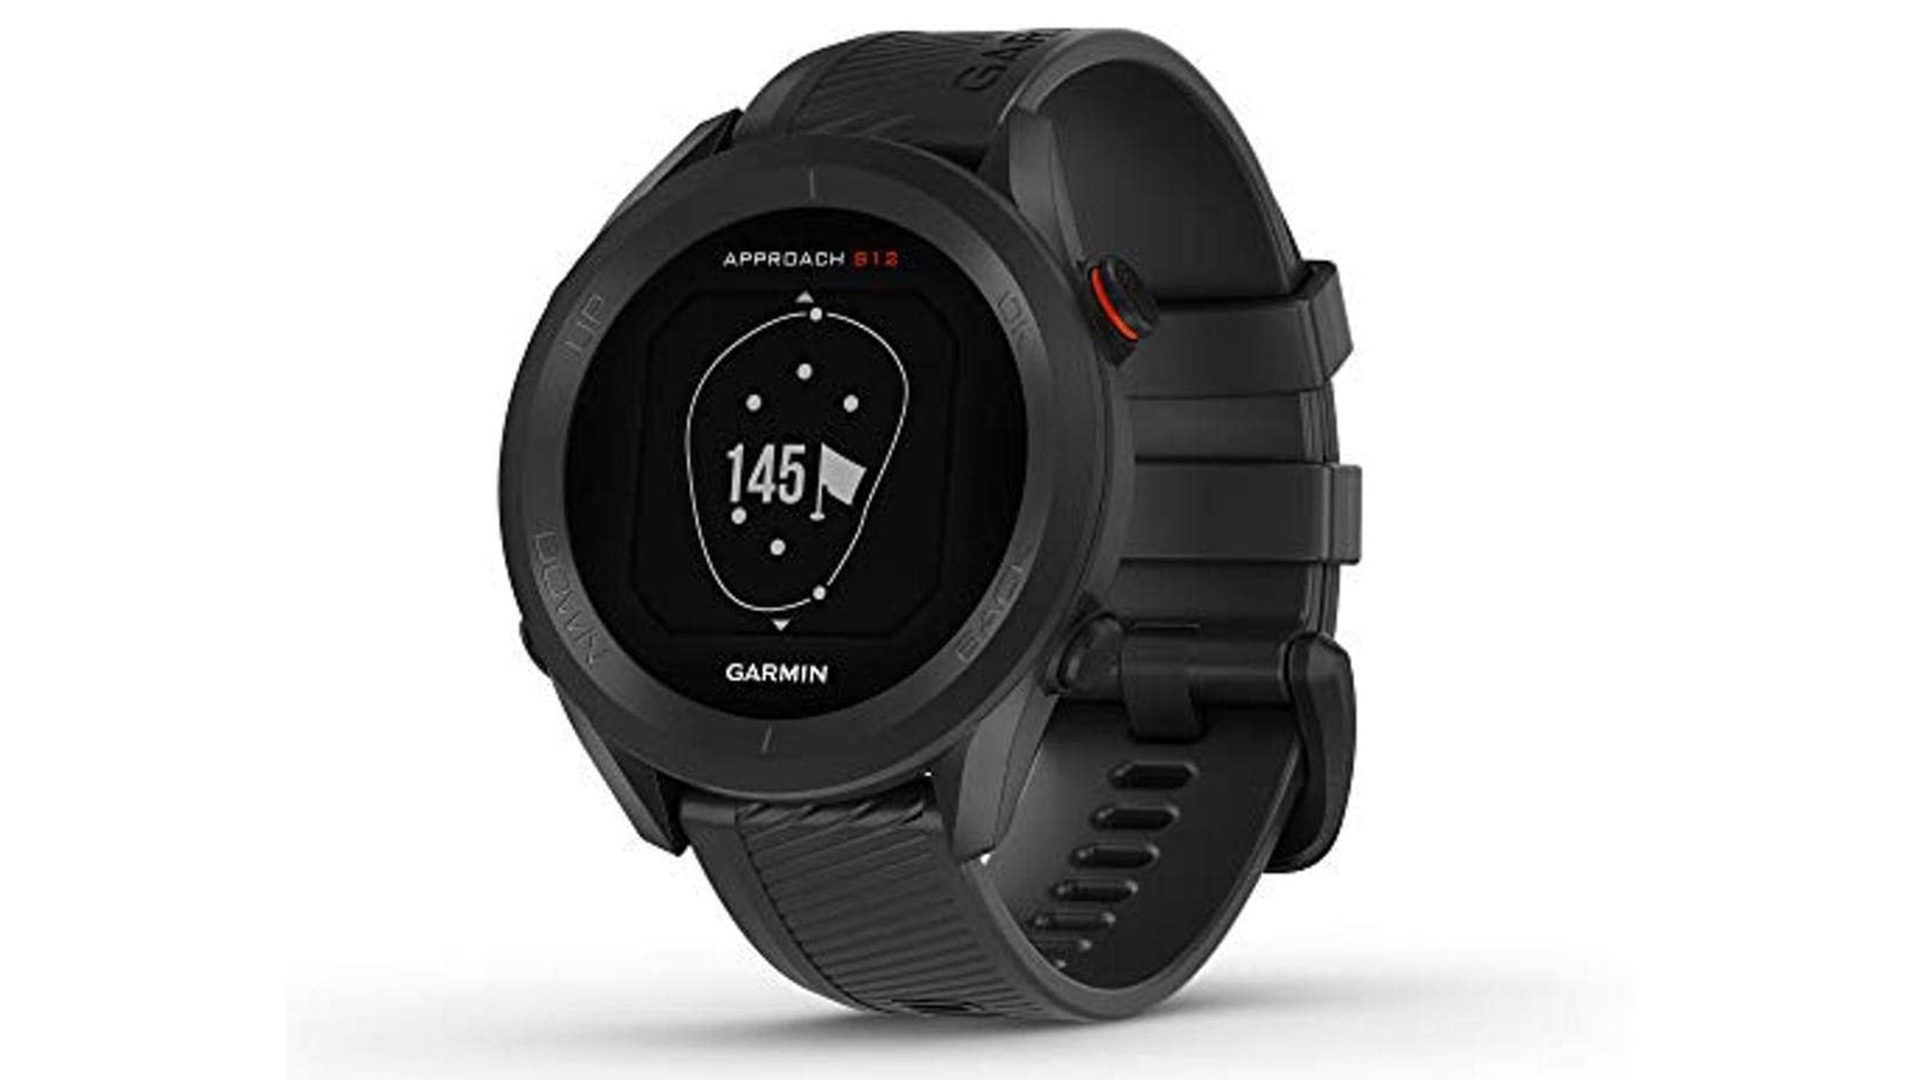 A product image of a Garmin Approach S12 represents the company's top budget option.